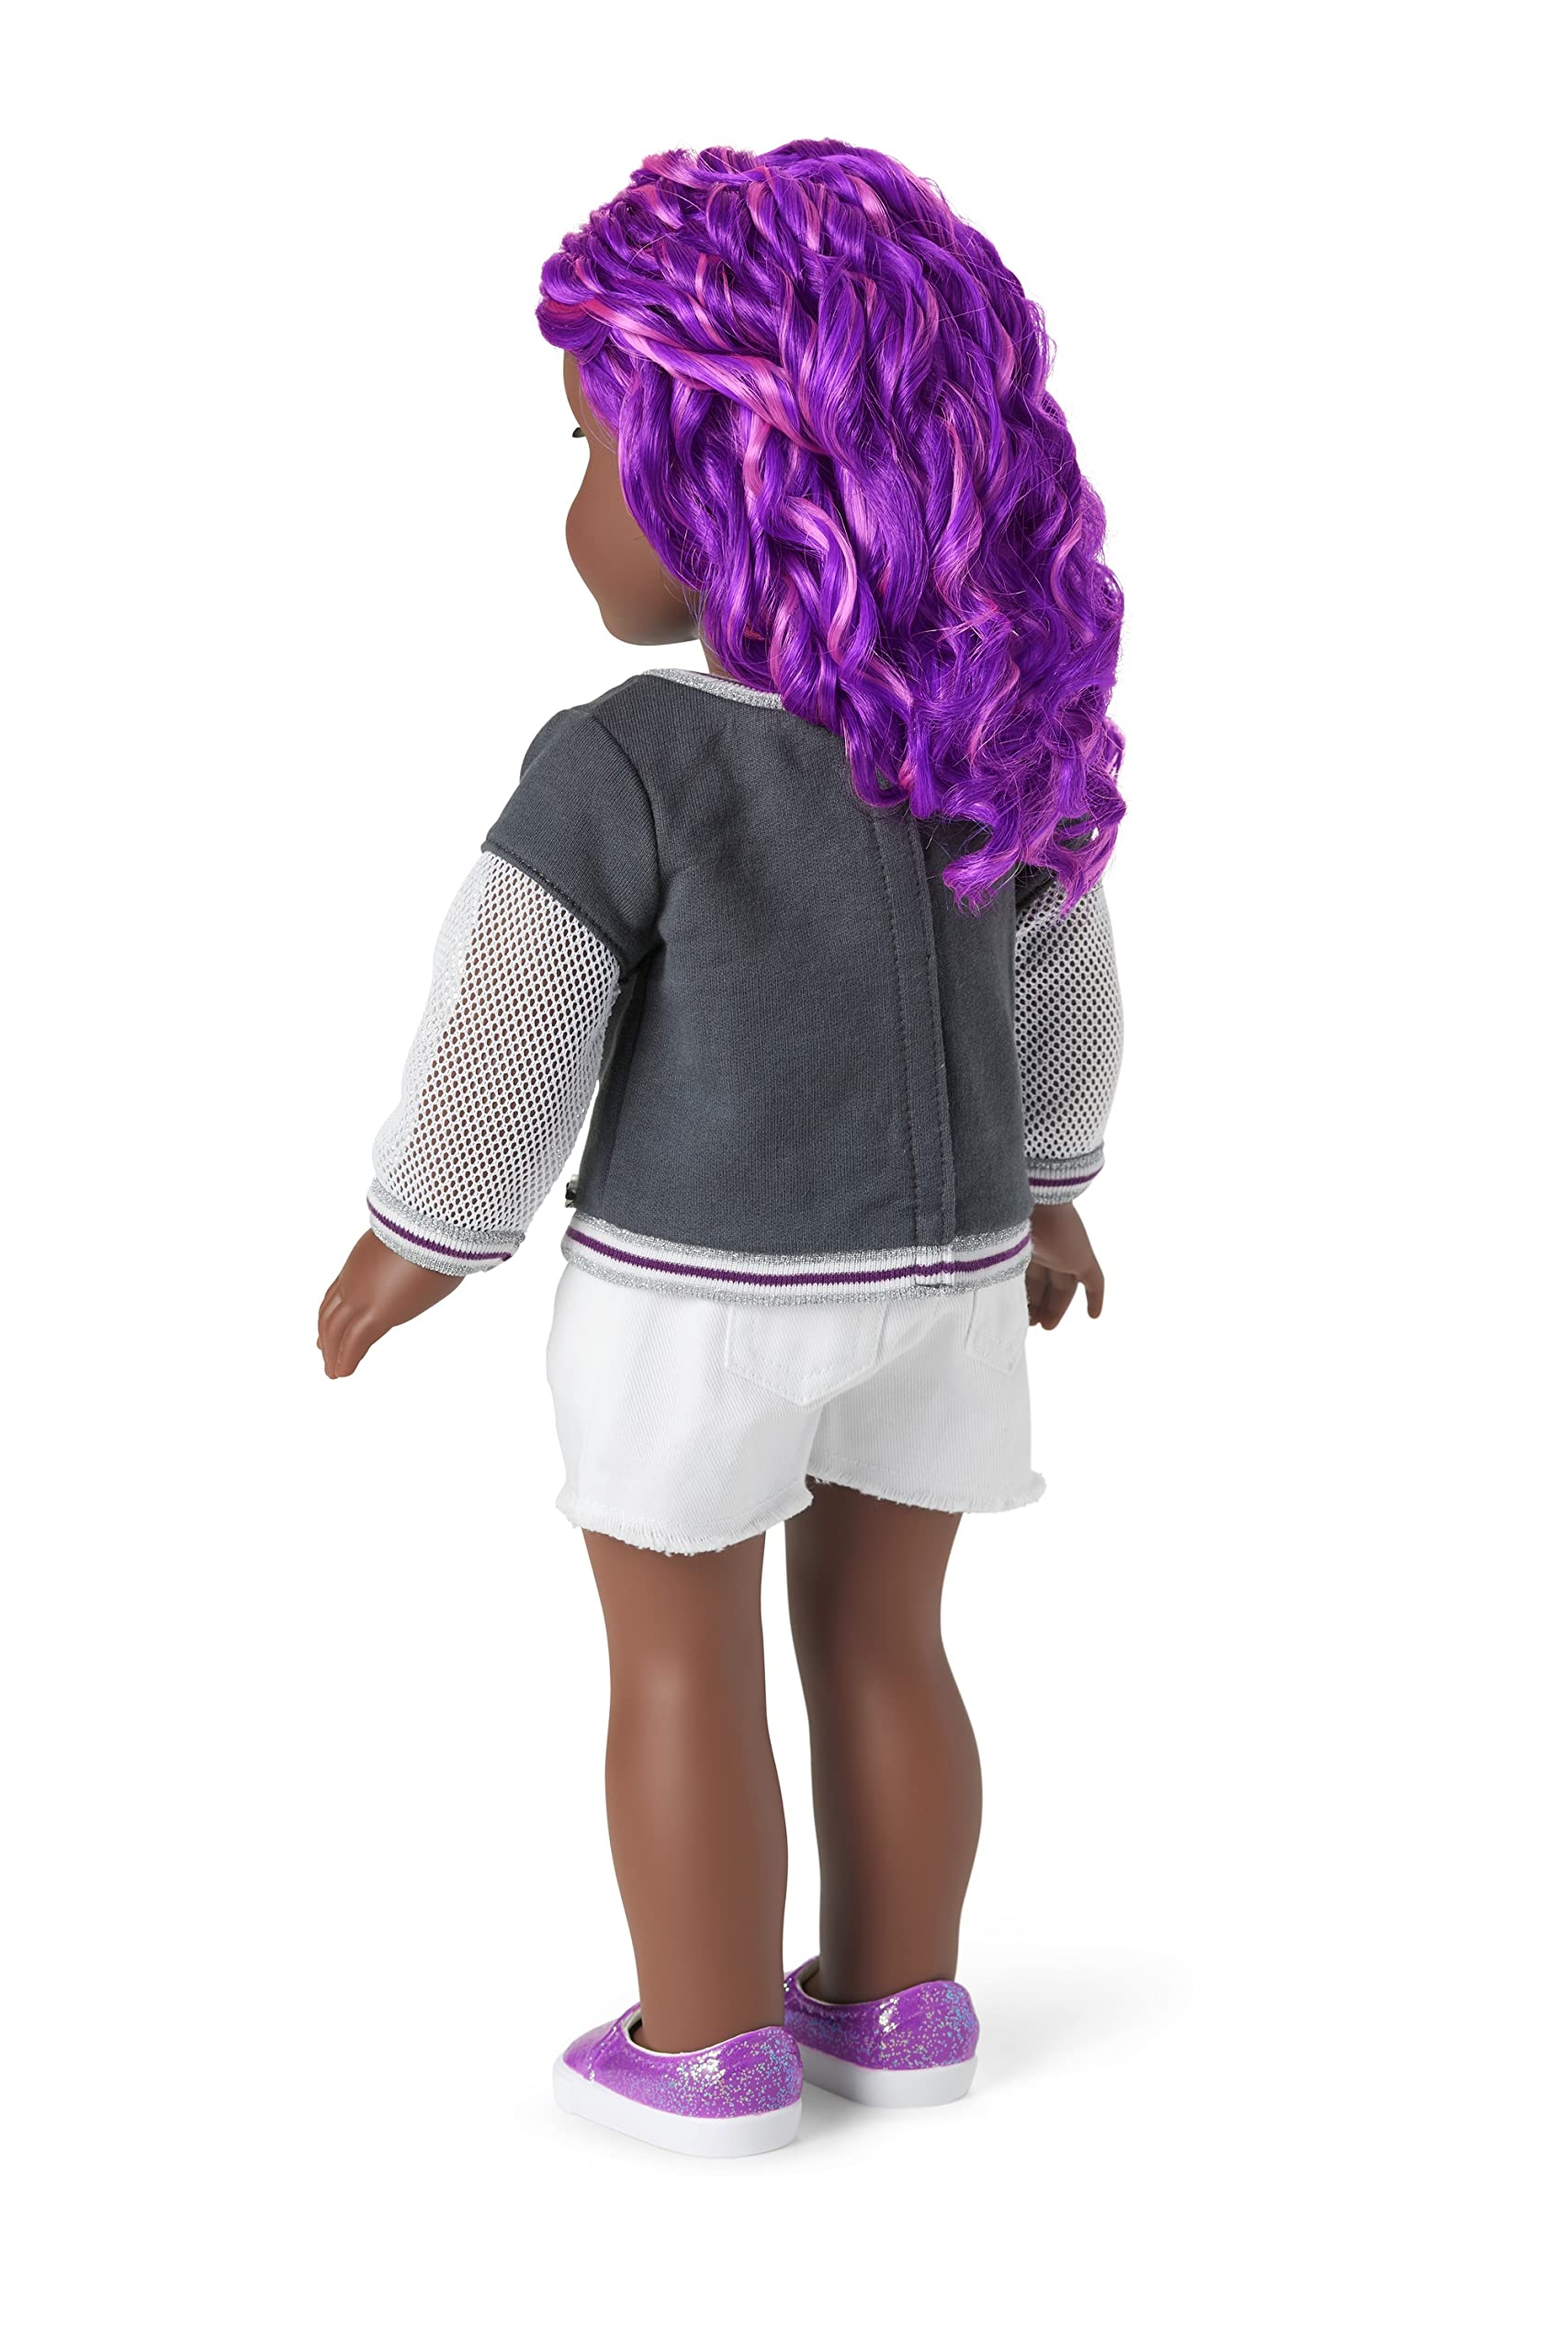 American Girl Truly Me 18-inch Doll #91 with Gray Eyes, Curly Purple Hair, and Very Deep Skin with Neutral Undertones in Girly Graffiti Outfit